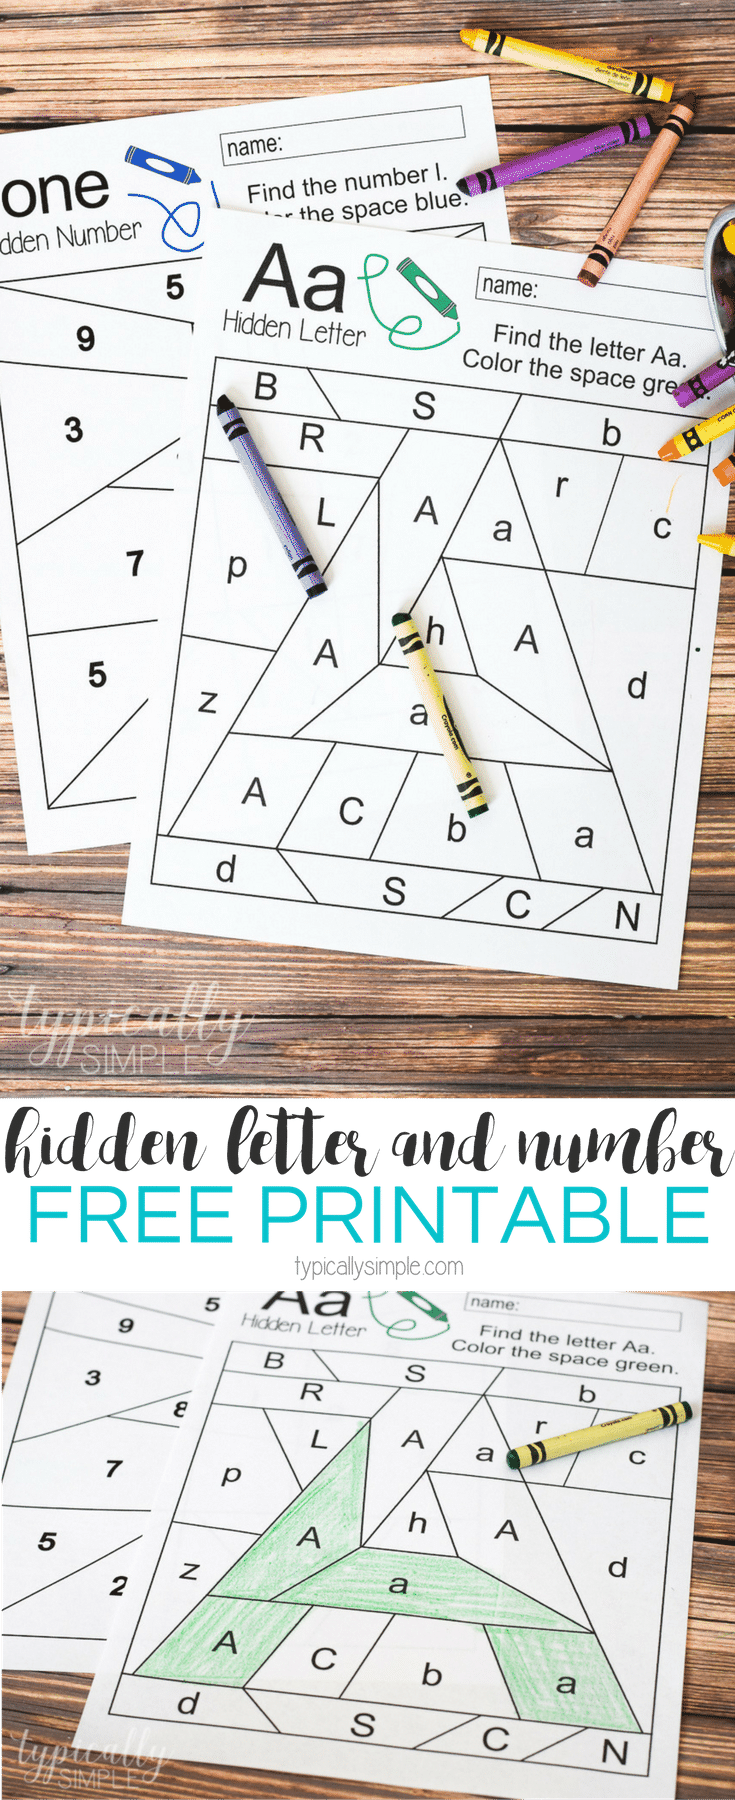 Hidden Number And Letter Worksheet Typically Simple